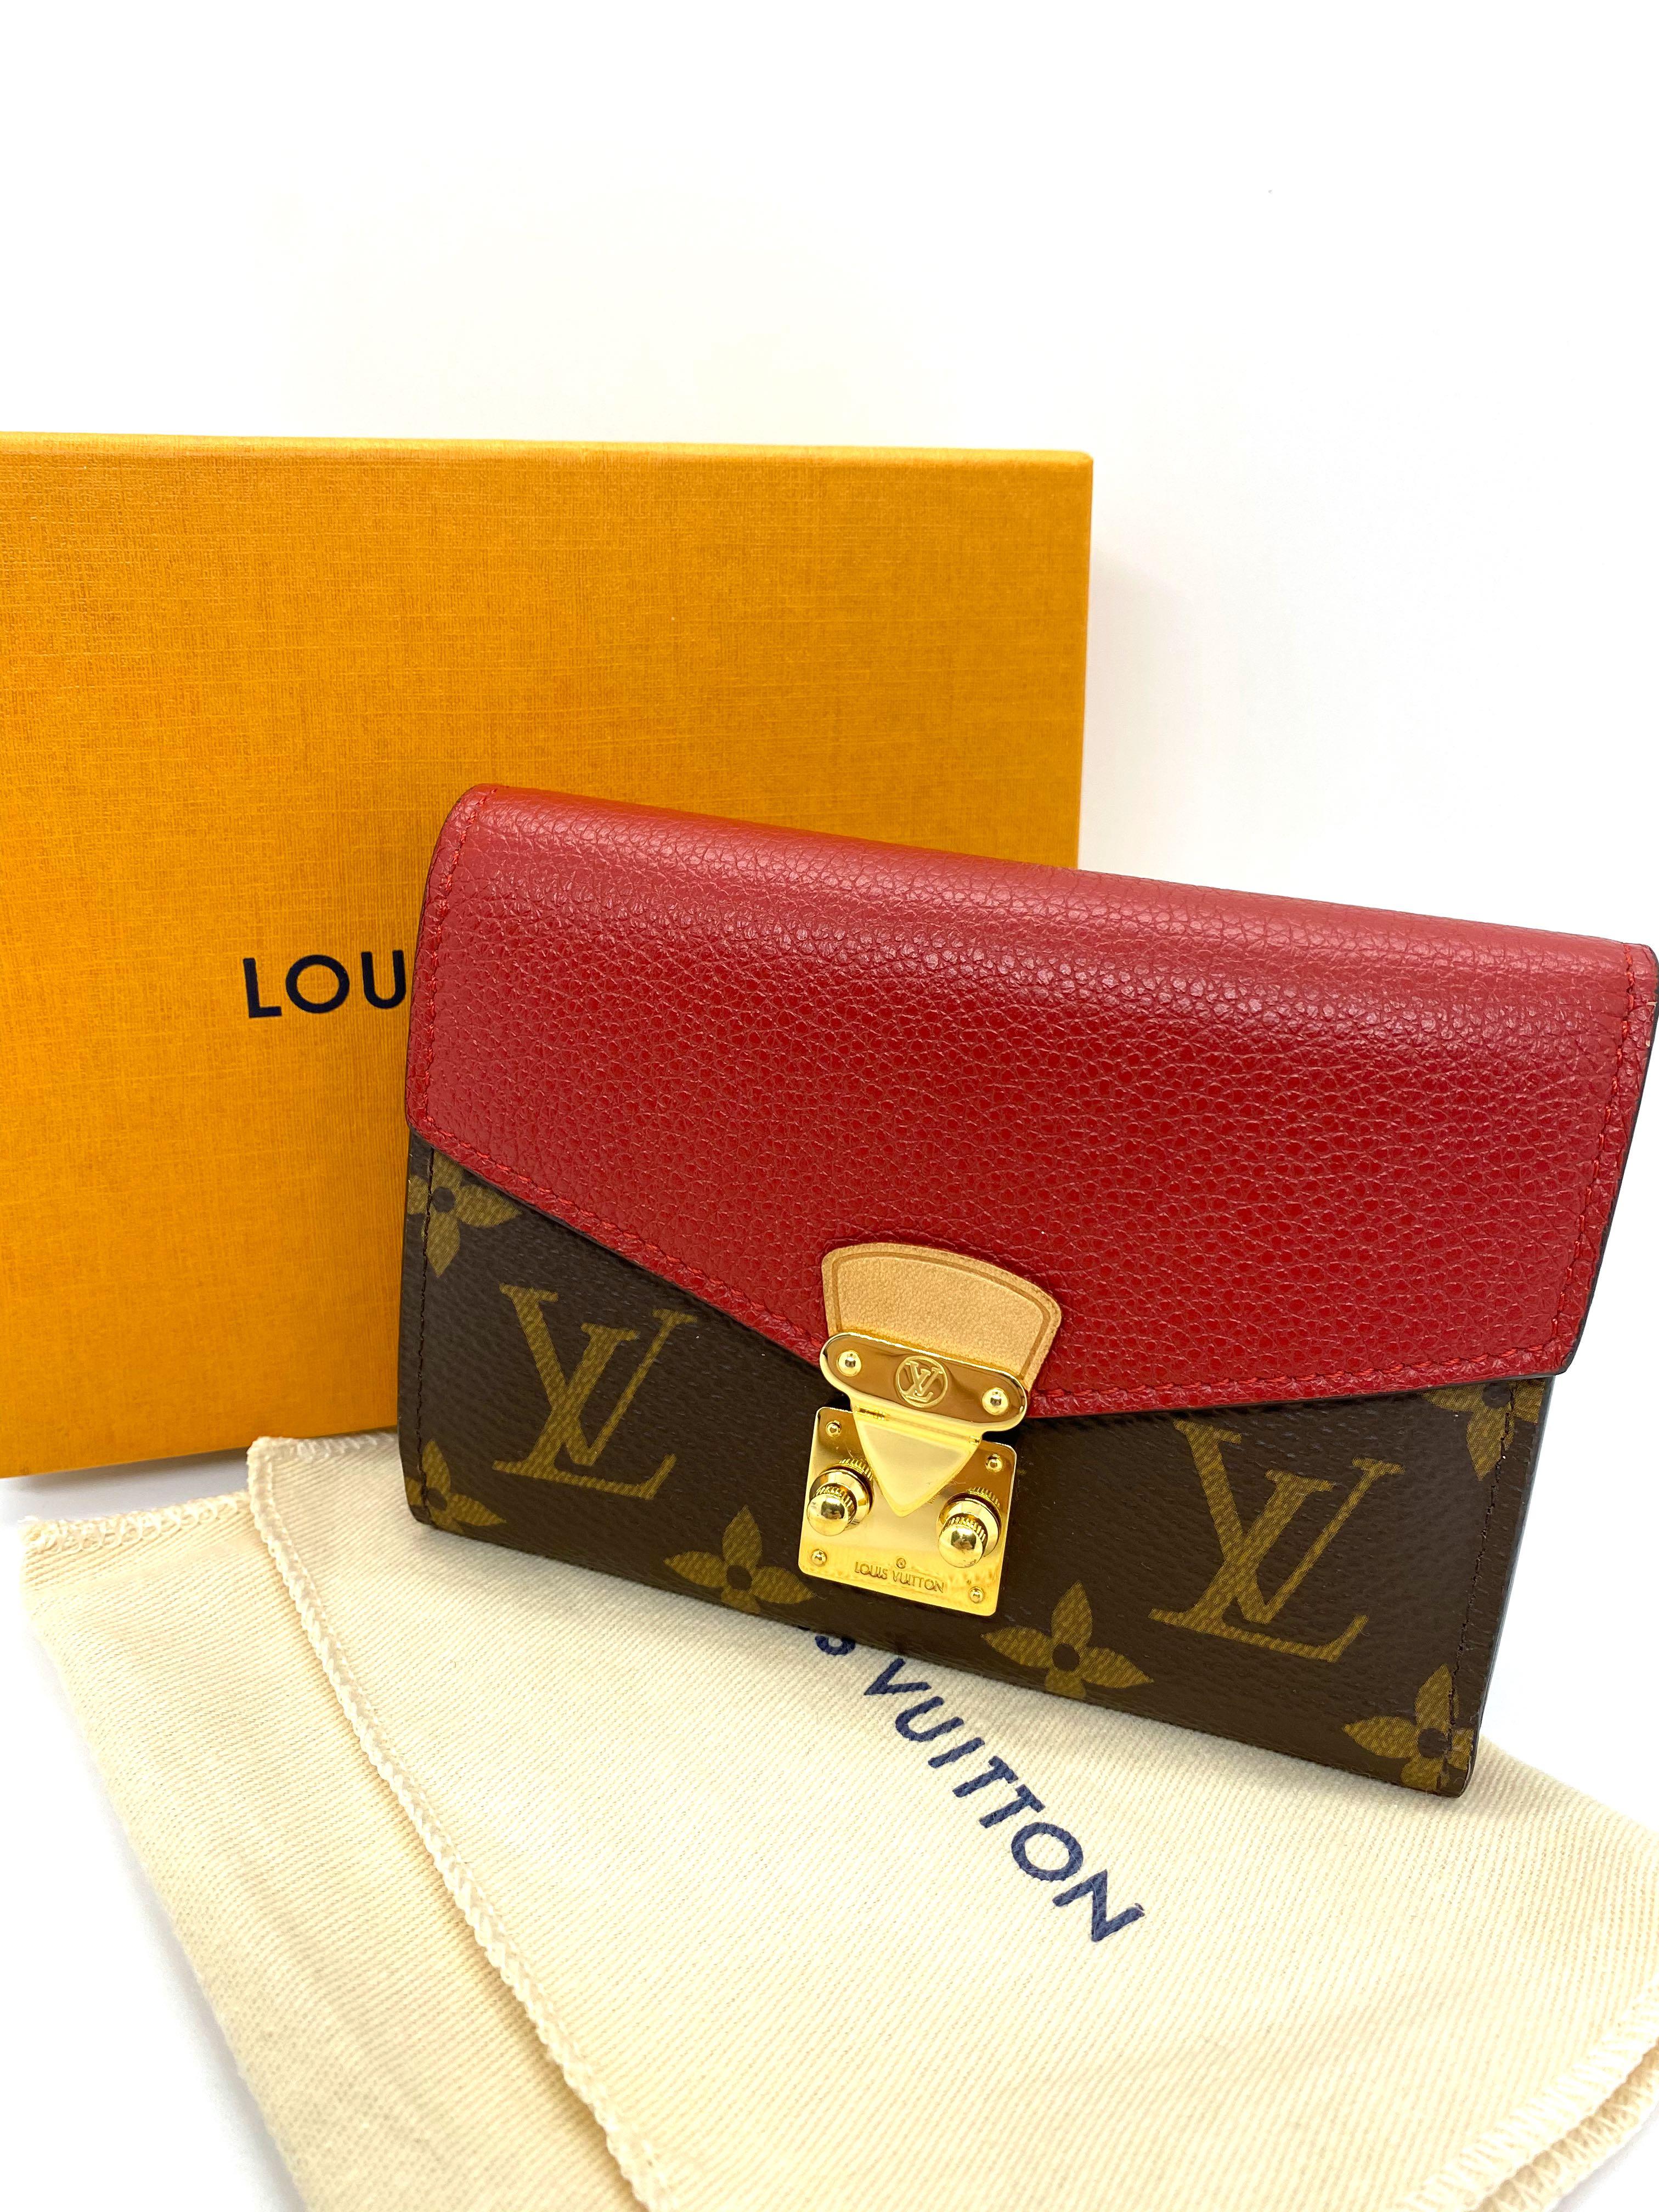 Shop Louis Vuitton Pince wallet (M62978) by asyouare